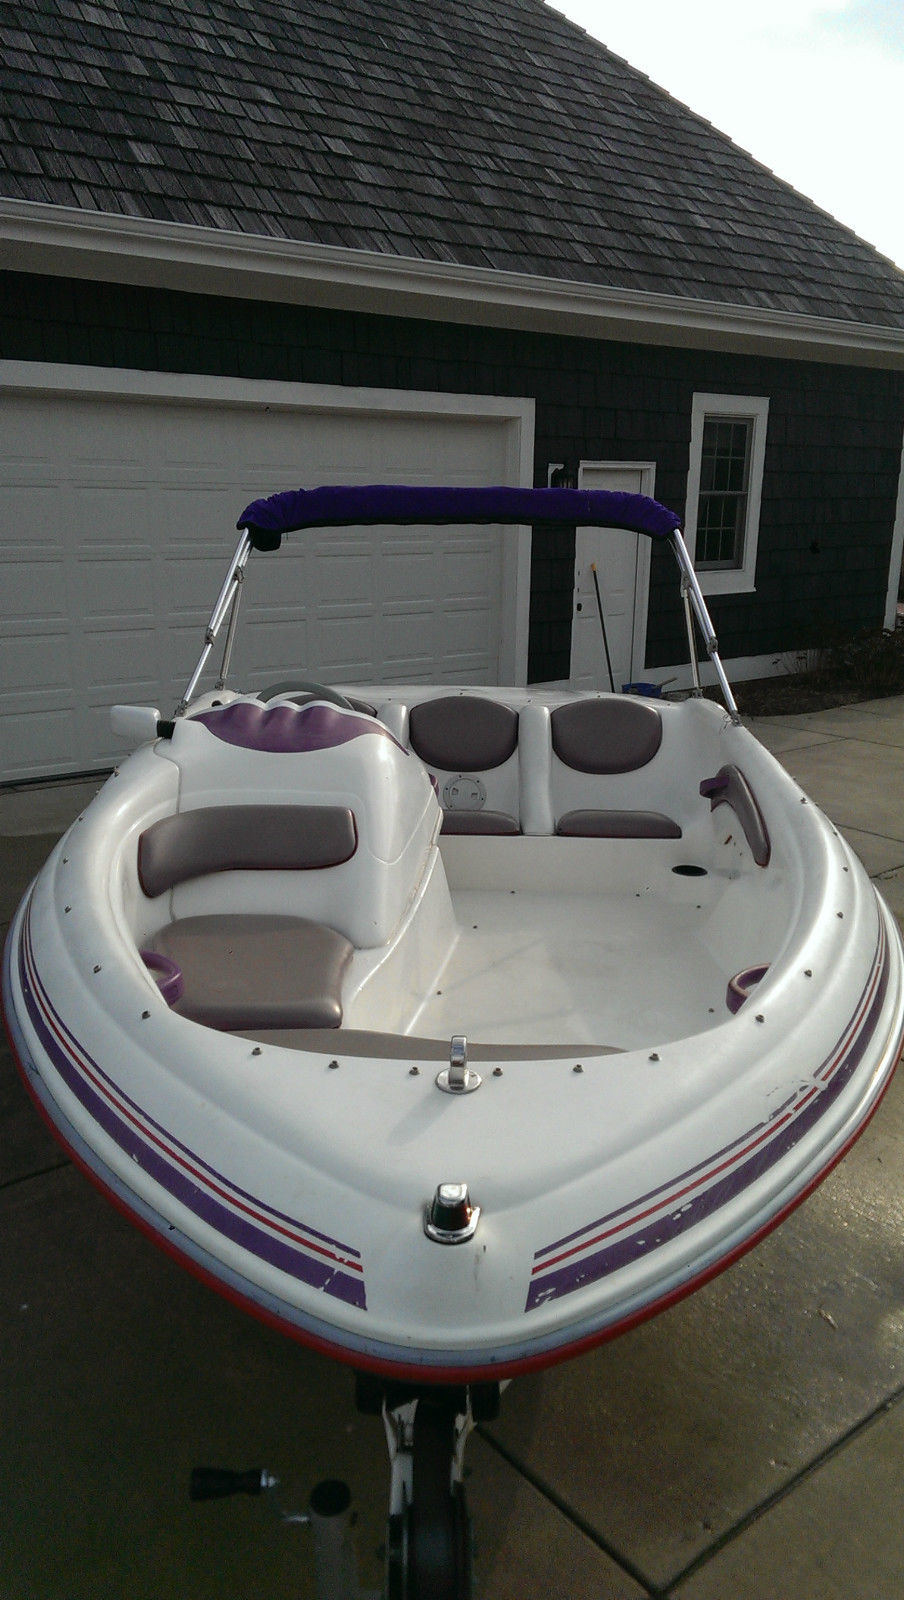 Sea Ray Sea Rayder F16 1995 for sale for $3,000 - Boats ...